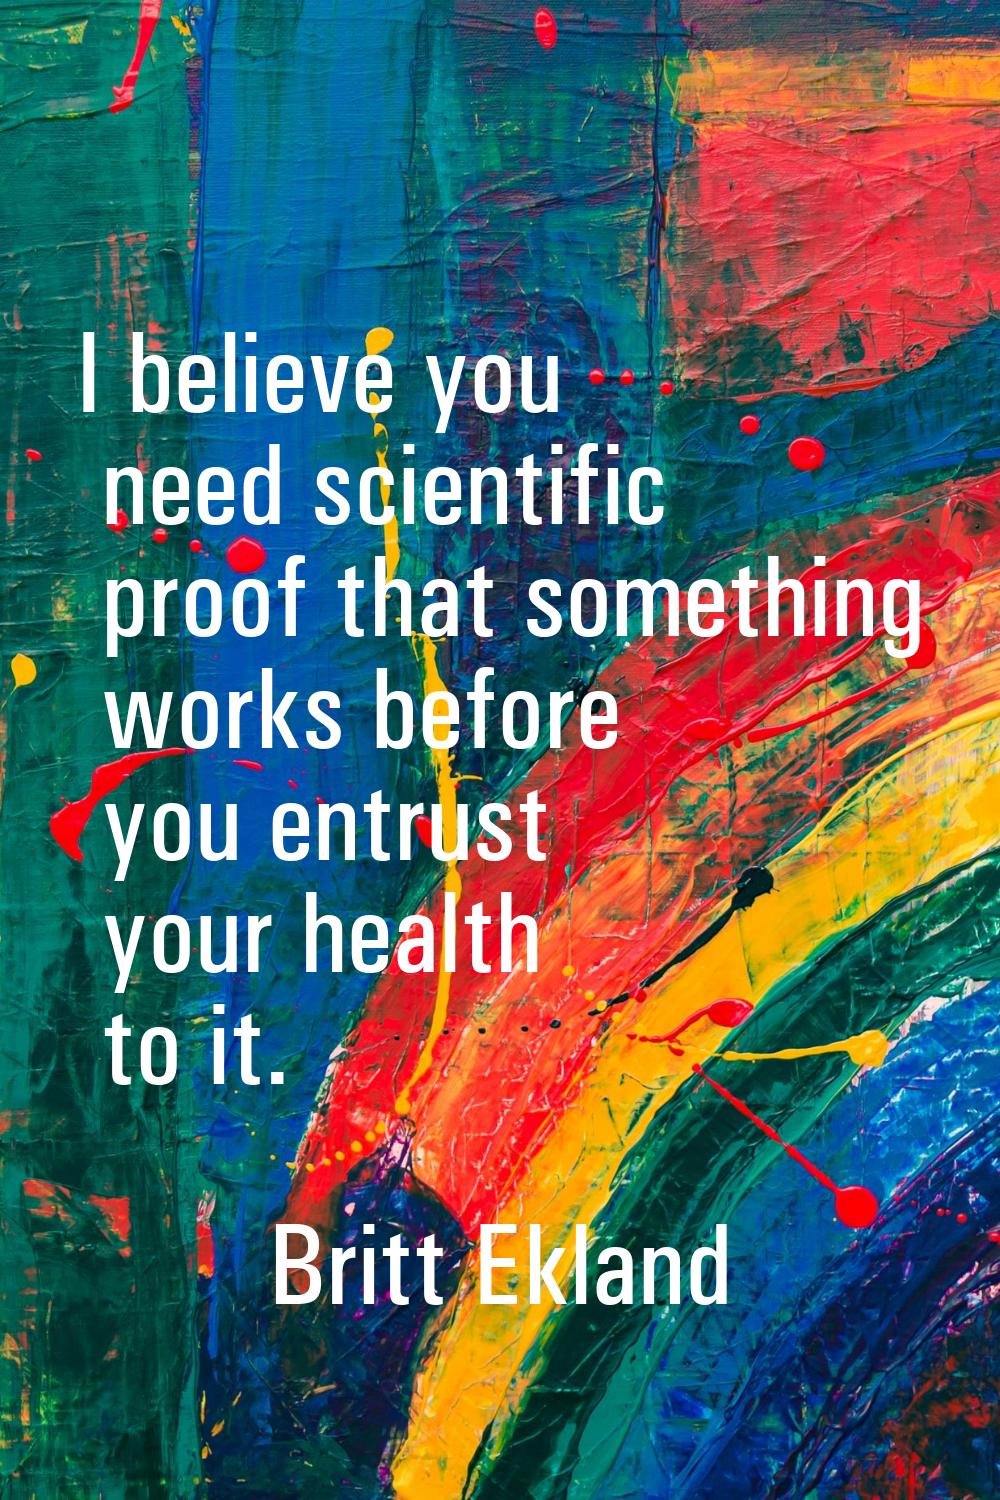 I believe you need scientific proof that something works before you entrust your health to it.